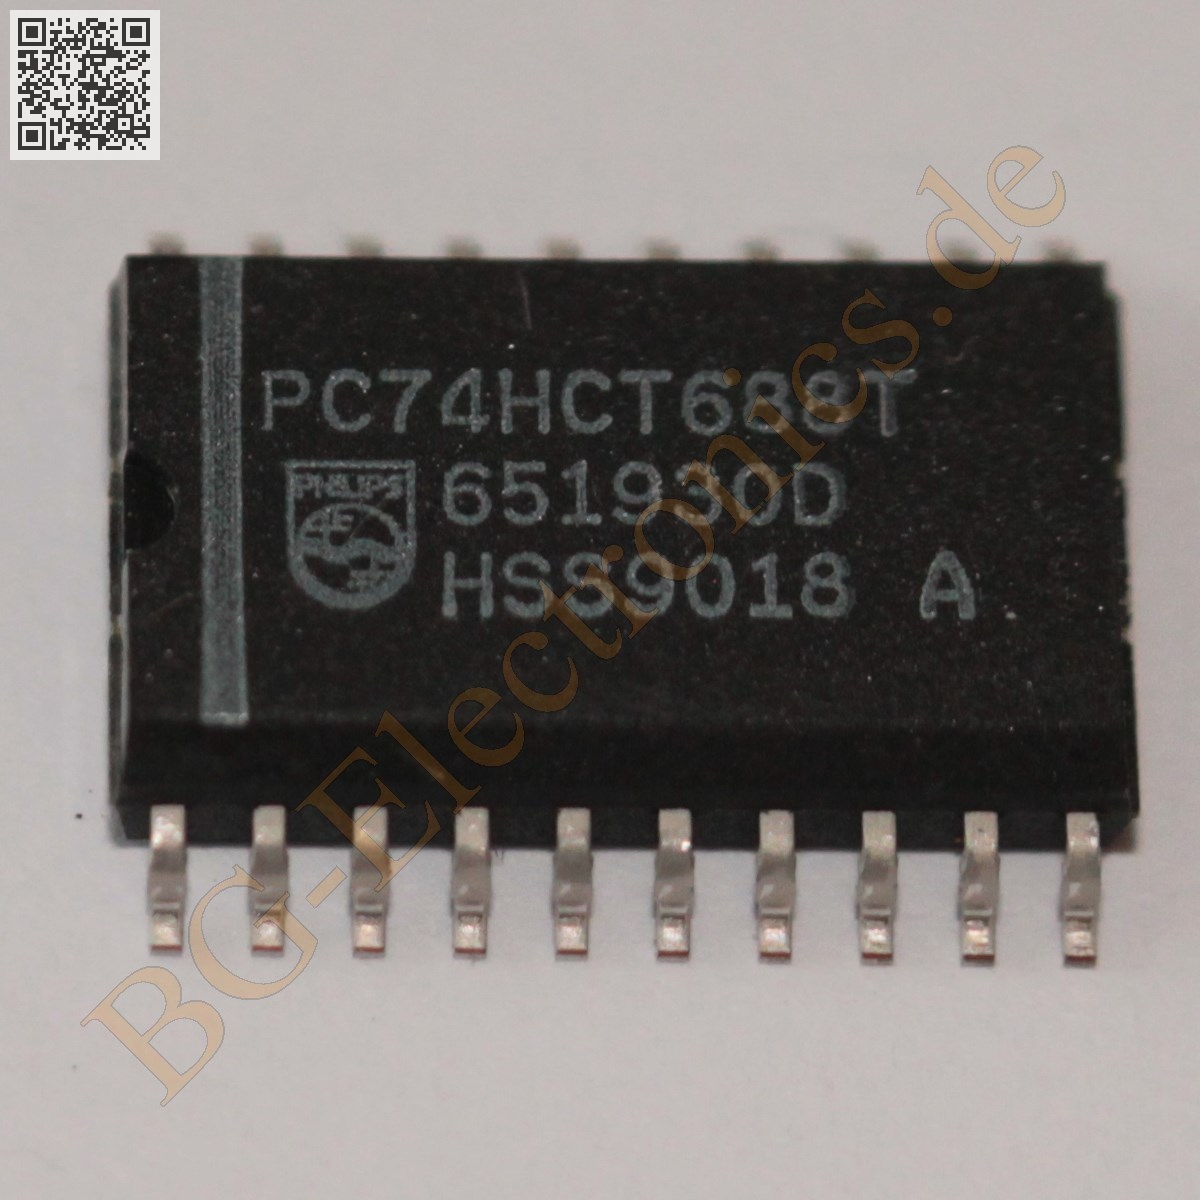 PC74HCT688T